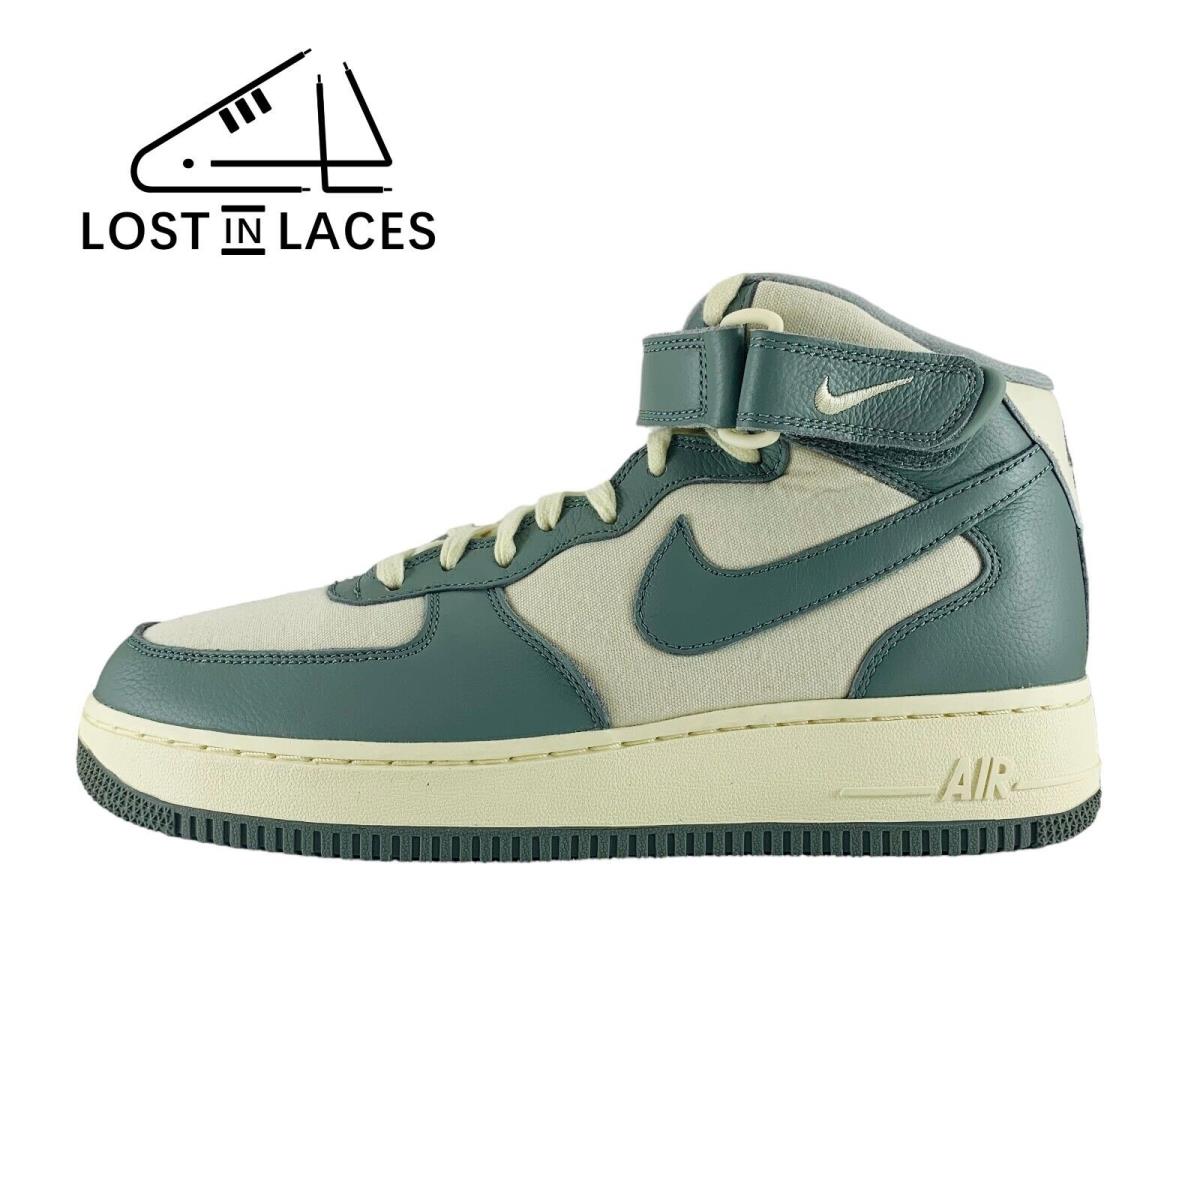 Nike Air Force 1 Mid `07 LX Nbhd Mica Green Sneakers Men`s Shoes FB2036-100 - Green